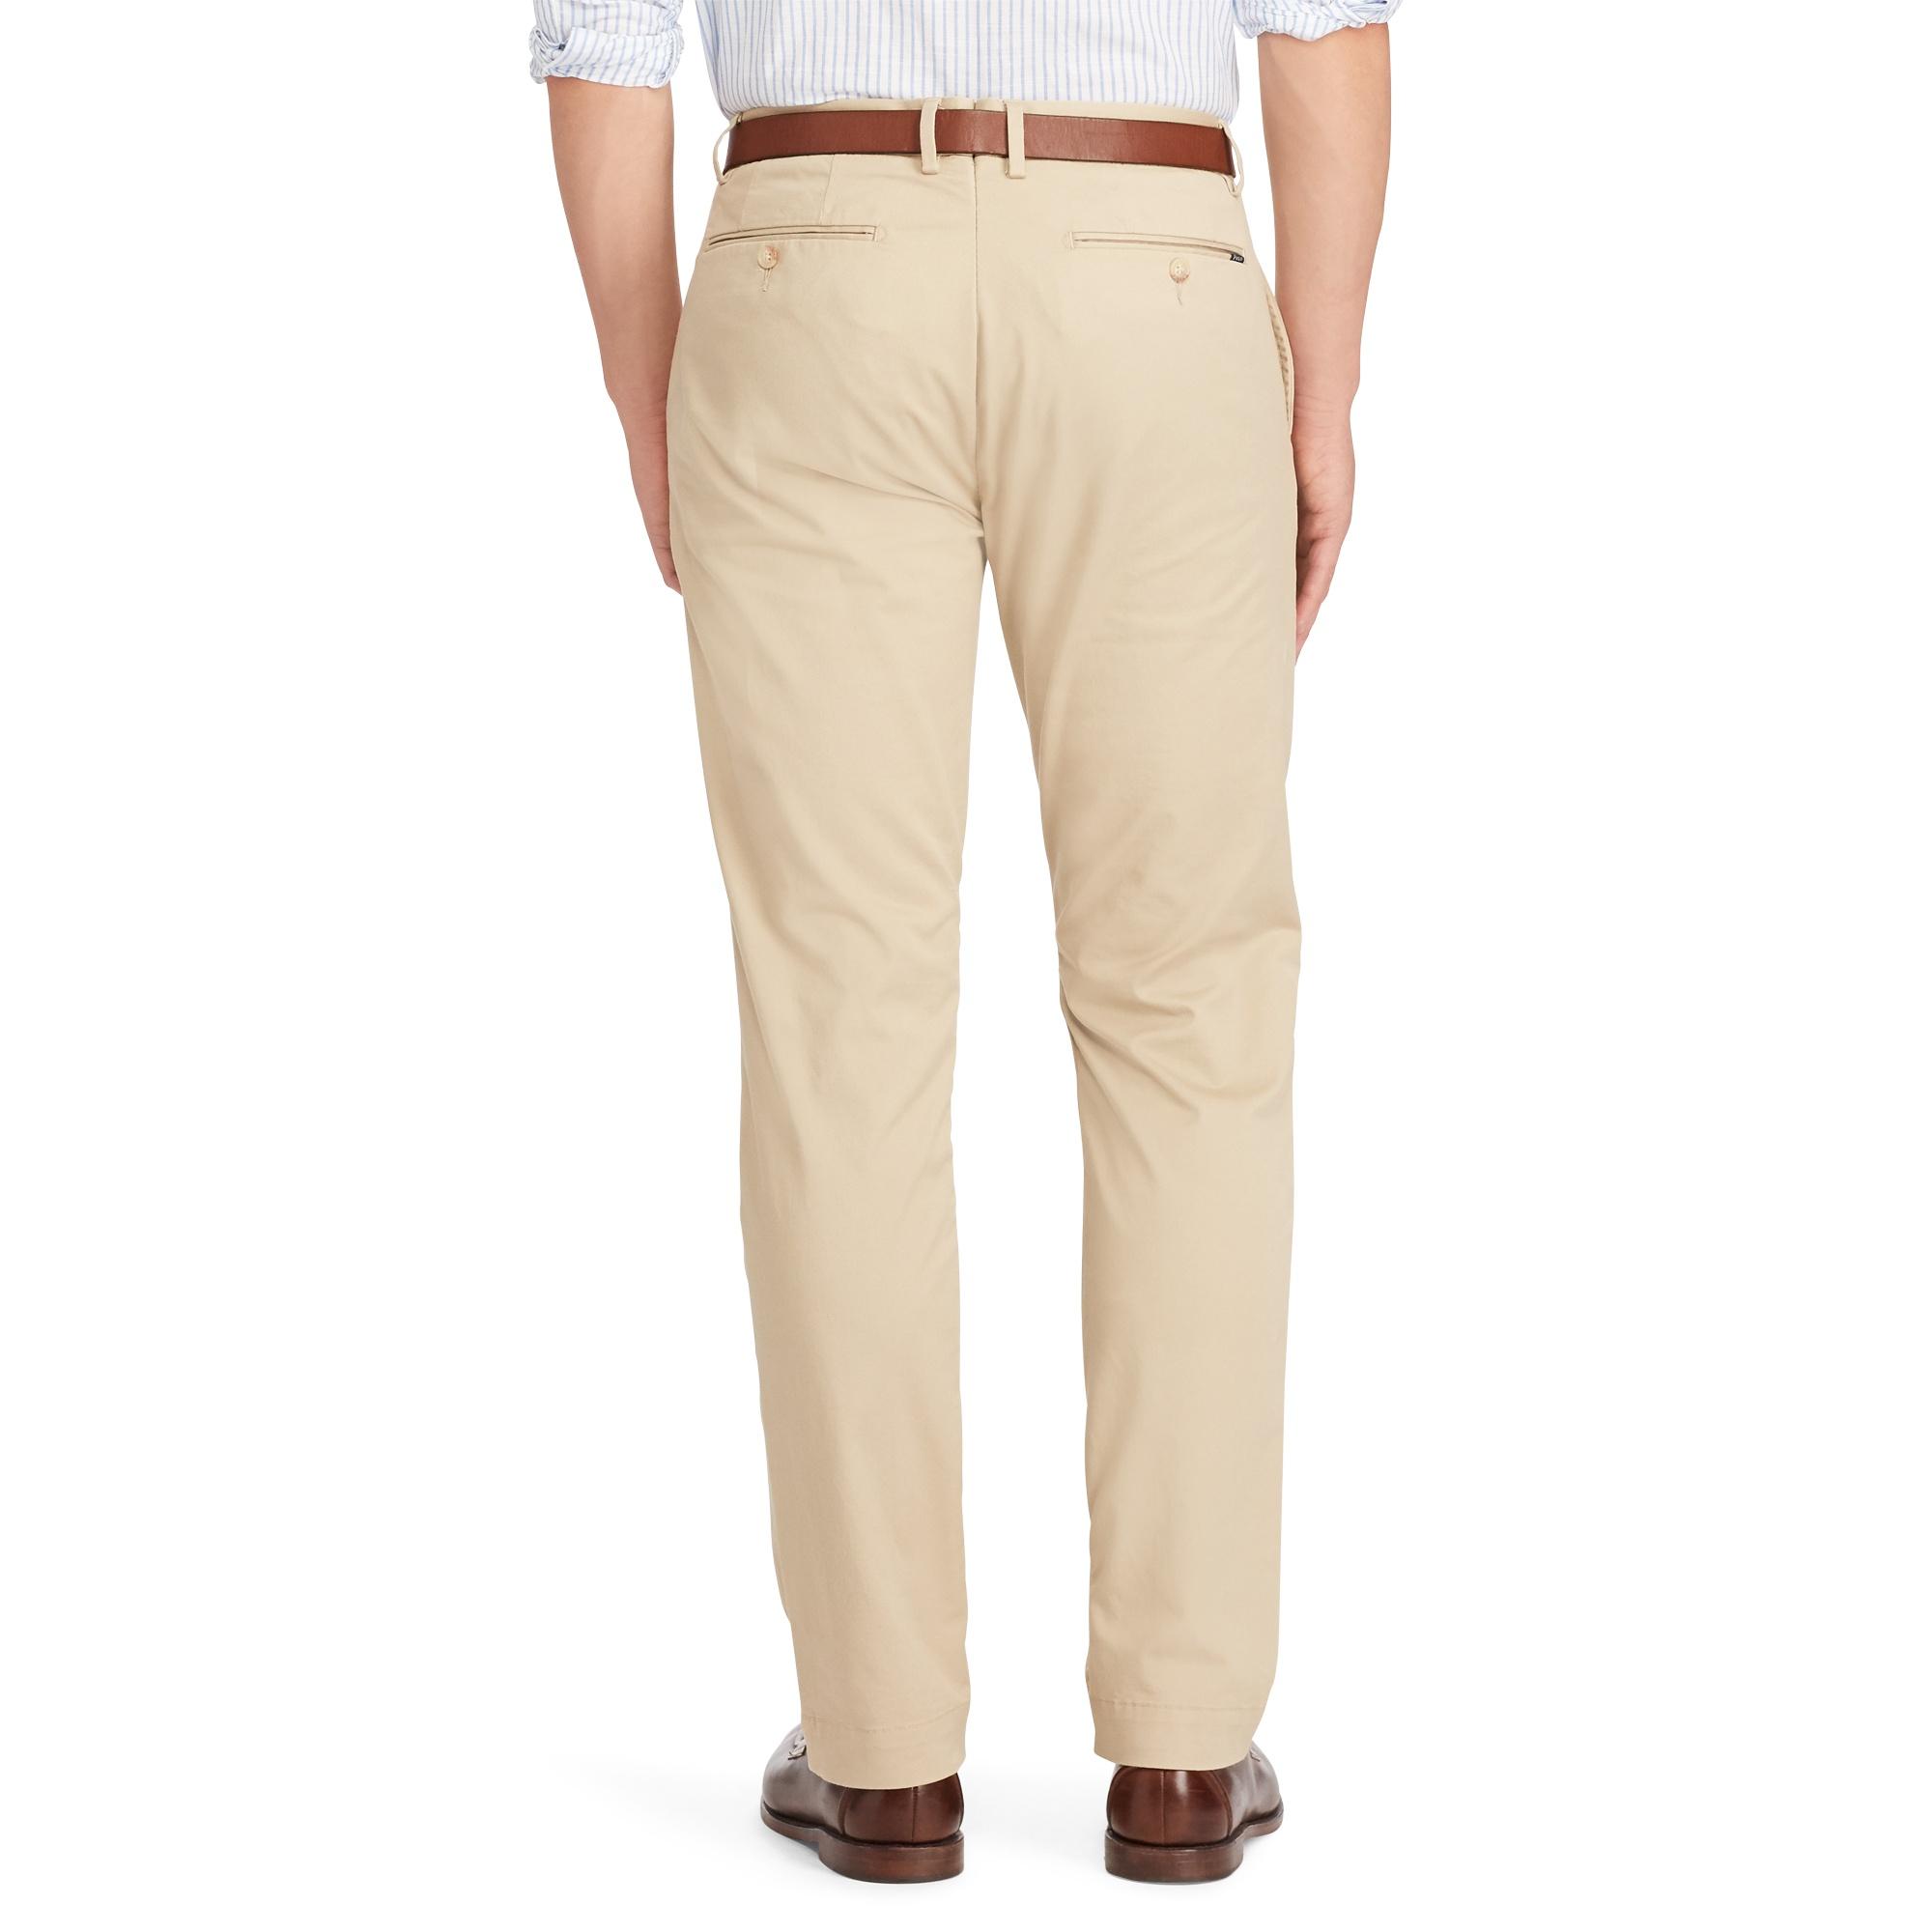 Polo Ralph Lauren Stretch Straight Fit Chino in Natural for Men - Lyst